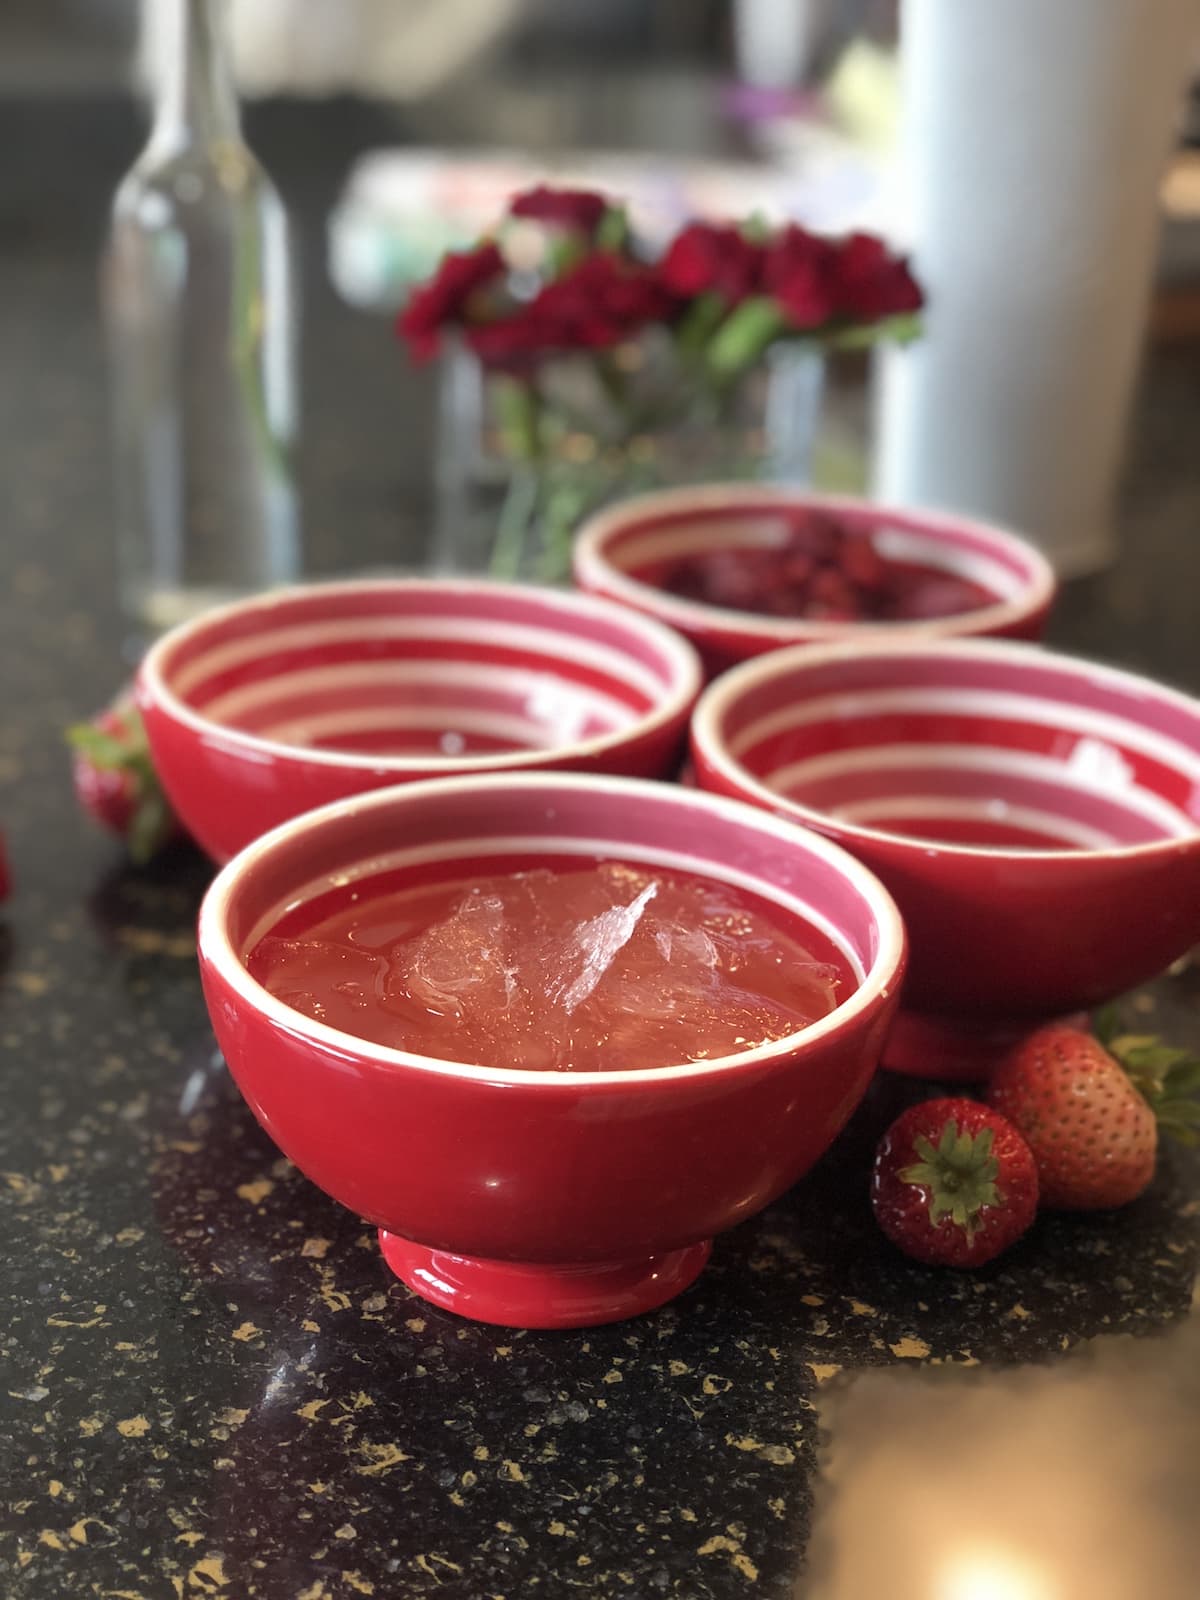 Girls Night In: The Perfect Frosé